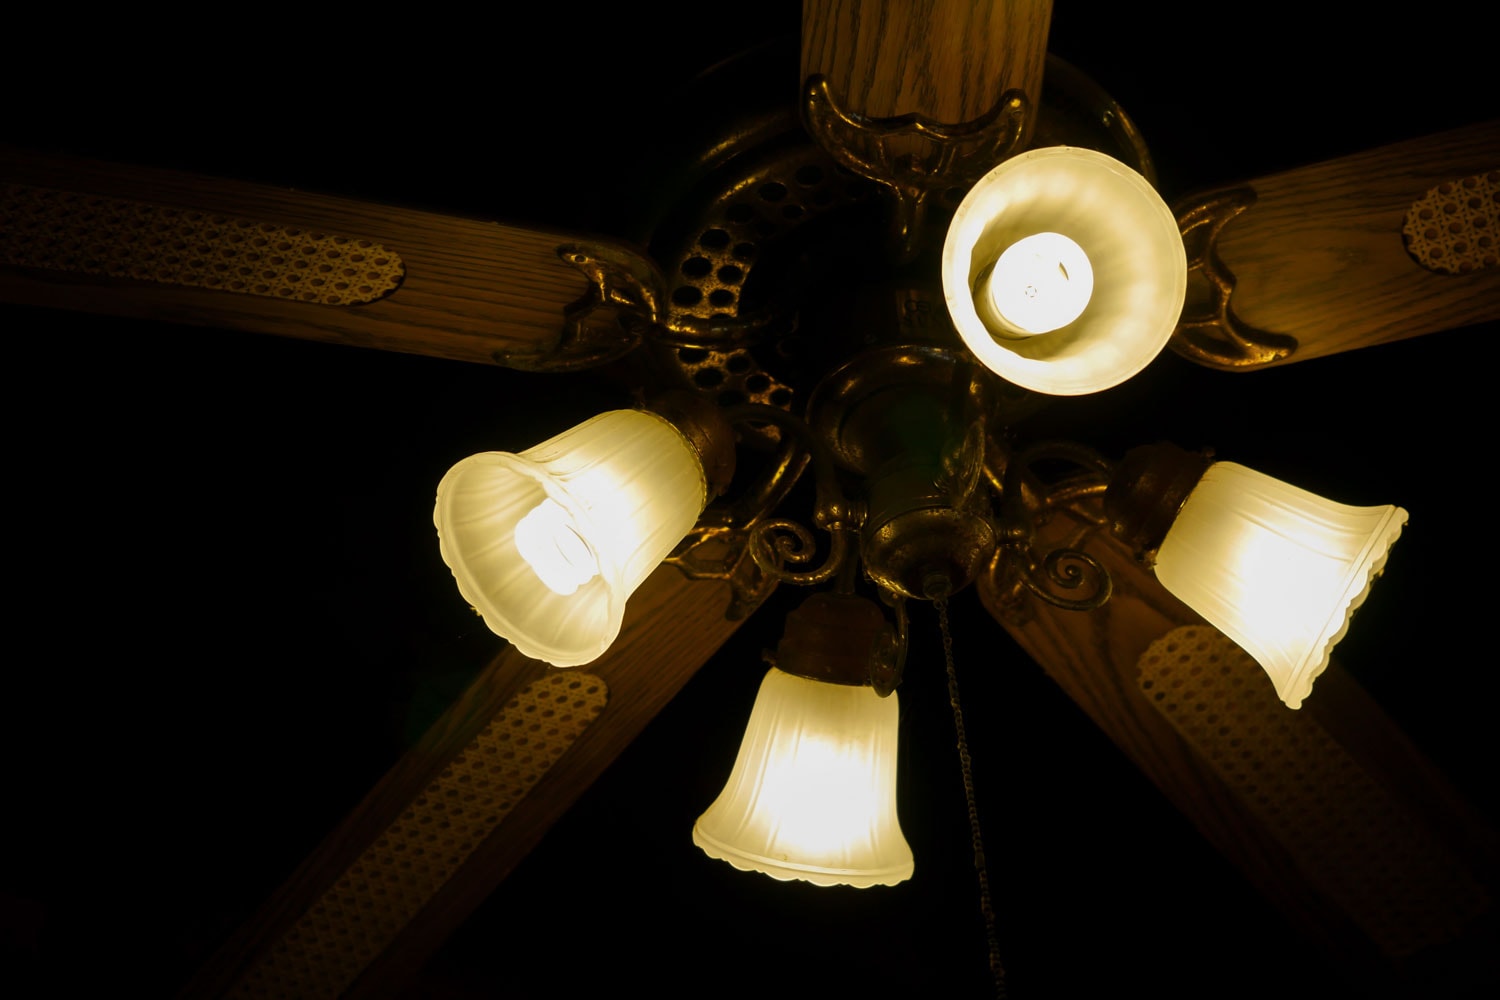 A ceiling fan with yellow colored light bulbs